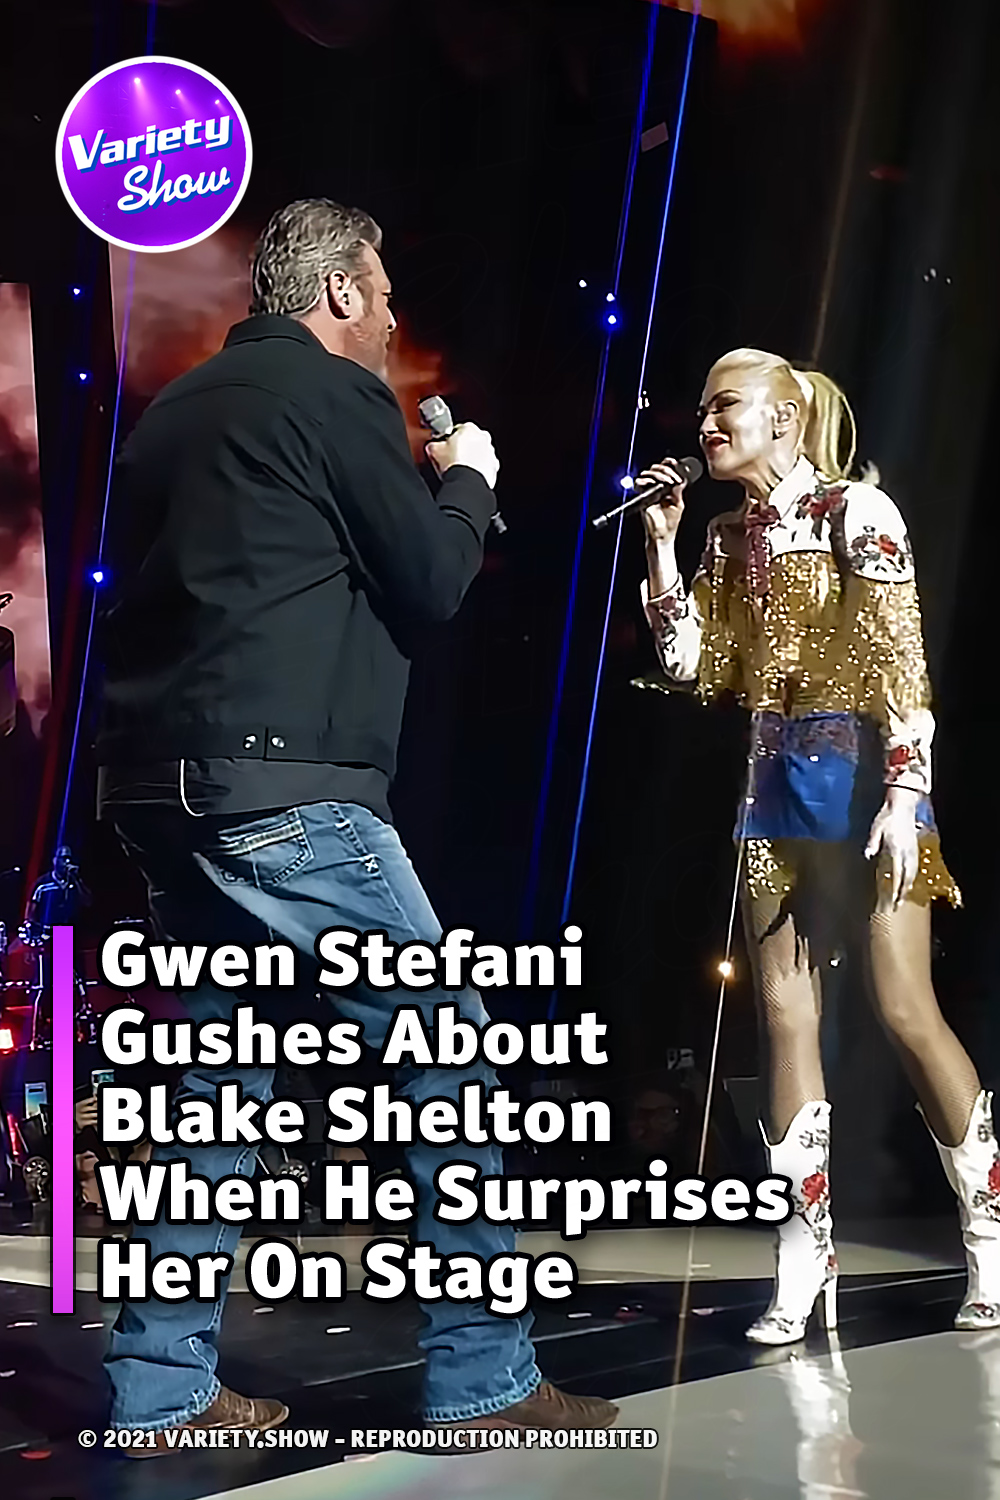 Gwen Stefani Gushes About Blake Shelton When He Surprises Her On Stage